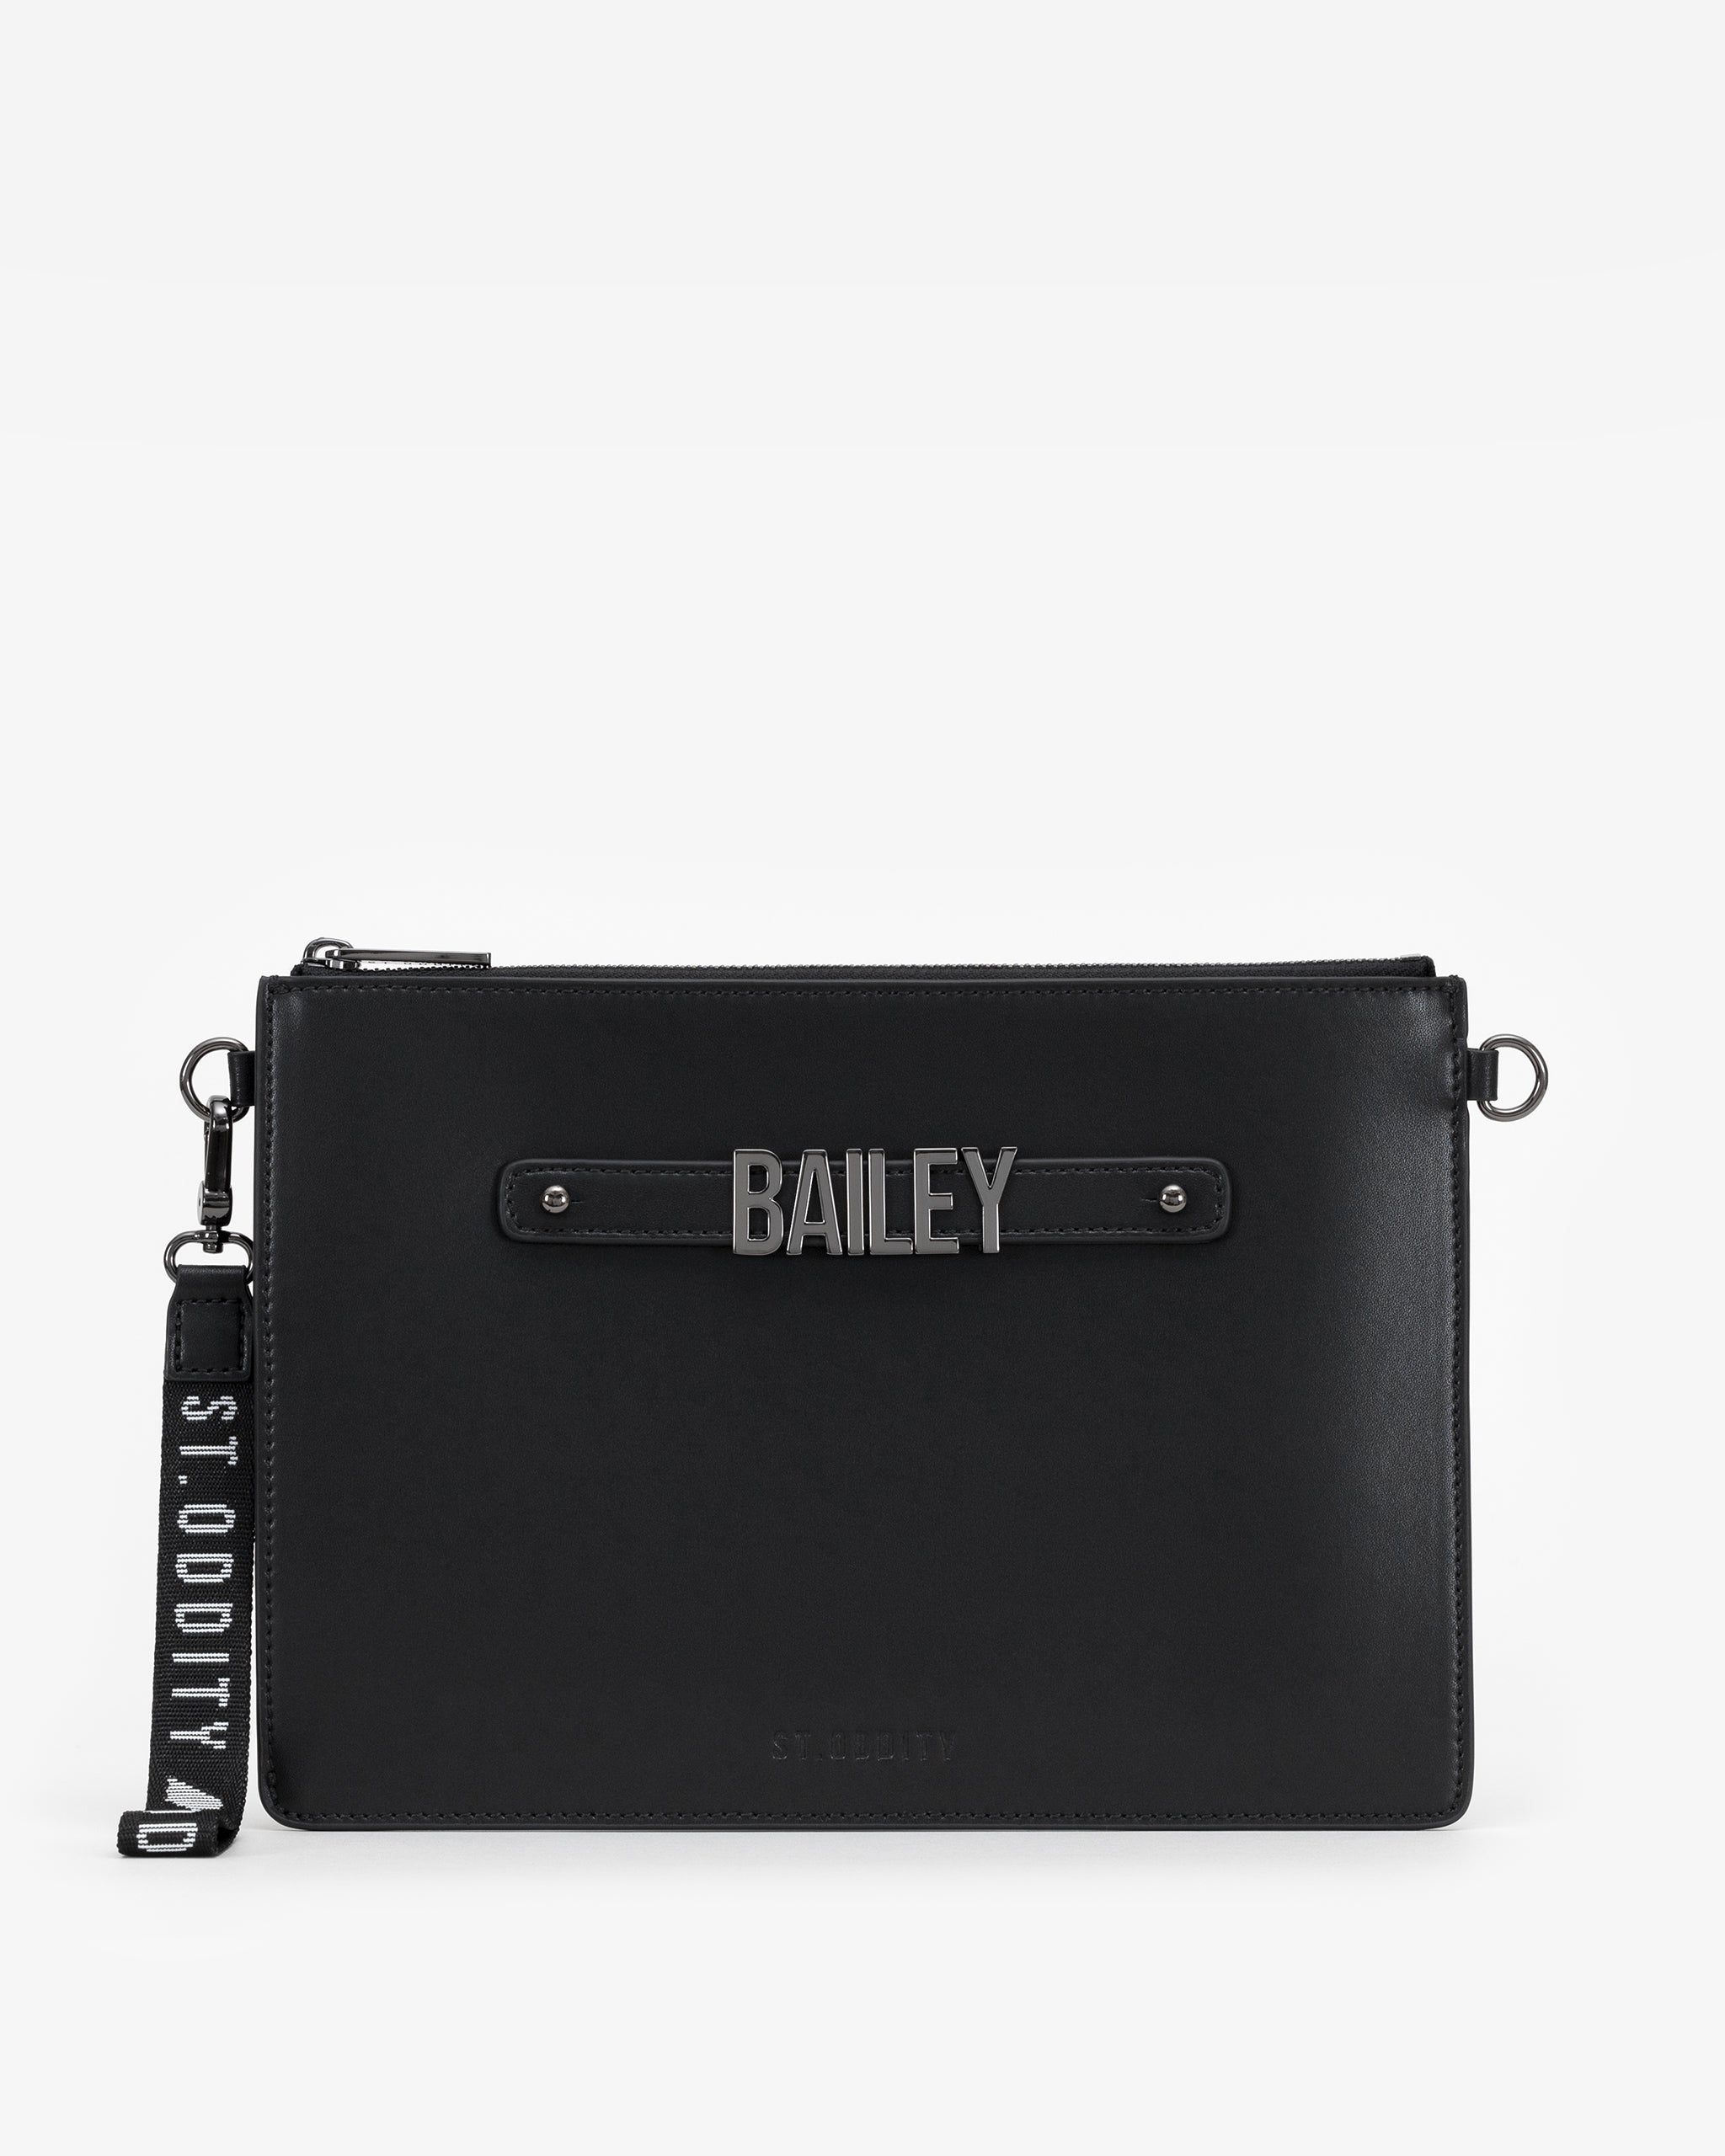 Large Pouch in Black/Gunmetal with Personalised Hardware